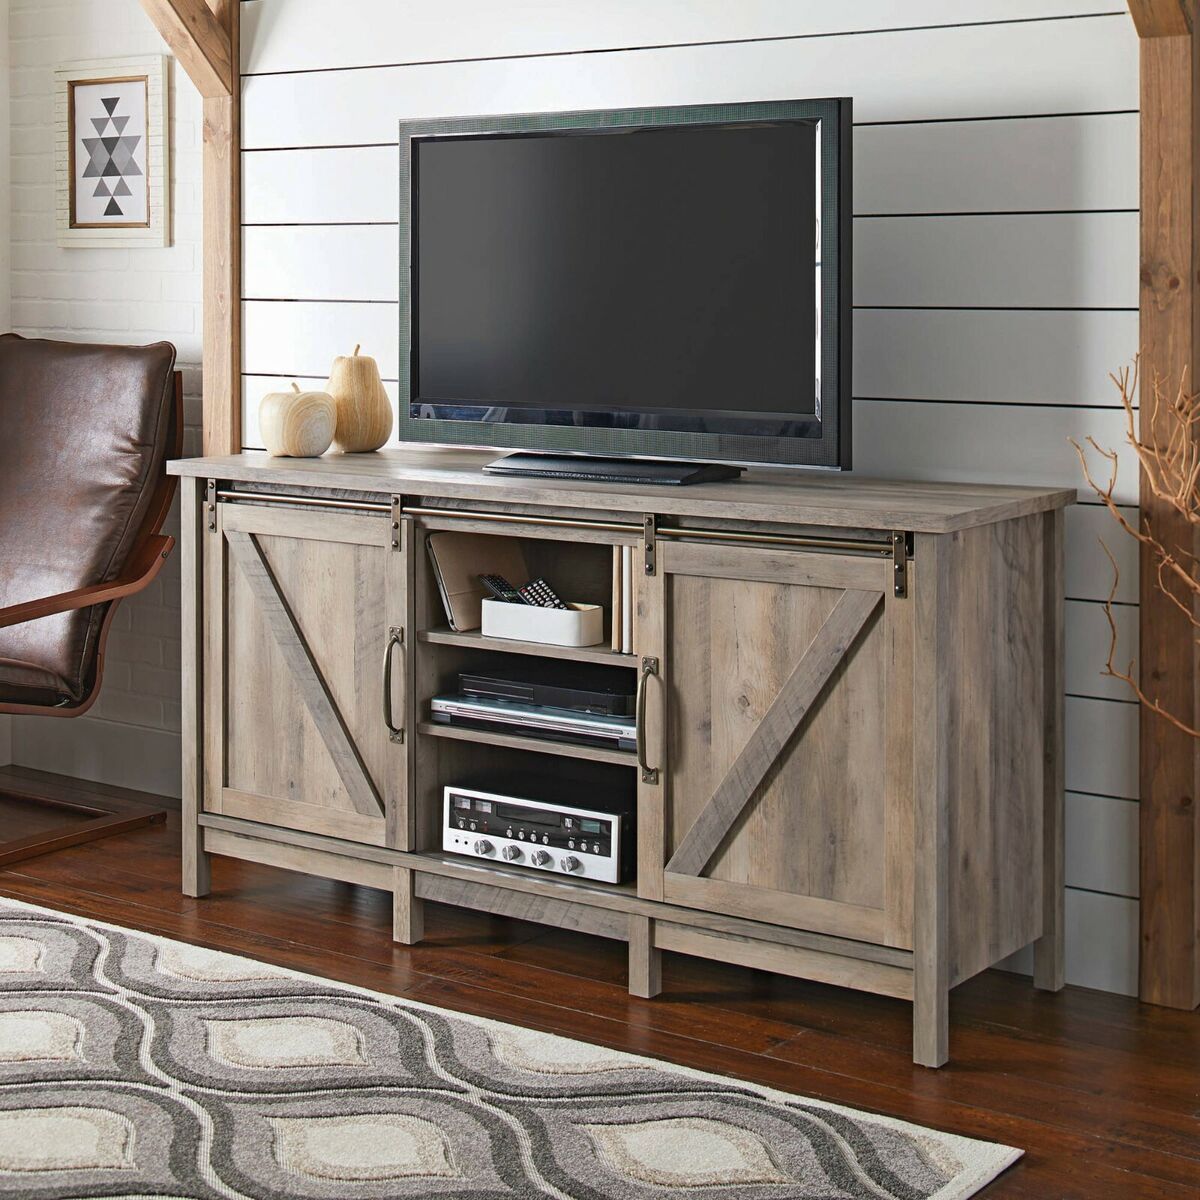 Better Homes And Gardens Modern Farmhouse Tv Stand For Tvs Up To 70", Rustic  Gra | Ebay In Farmhouse Tv Stands (View 5 of 15)